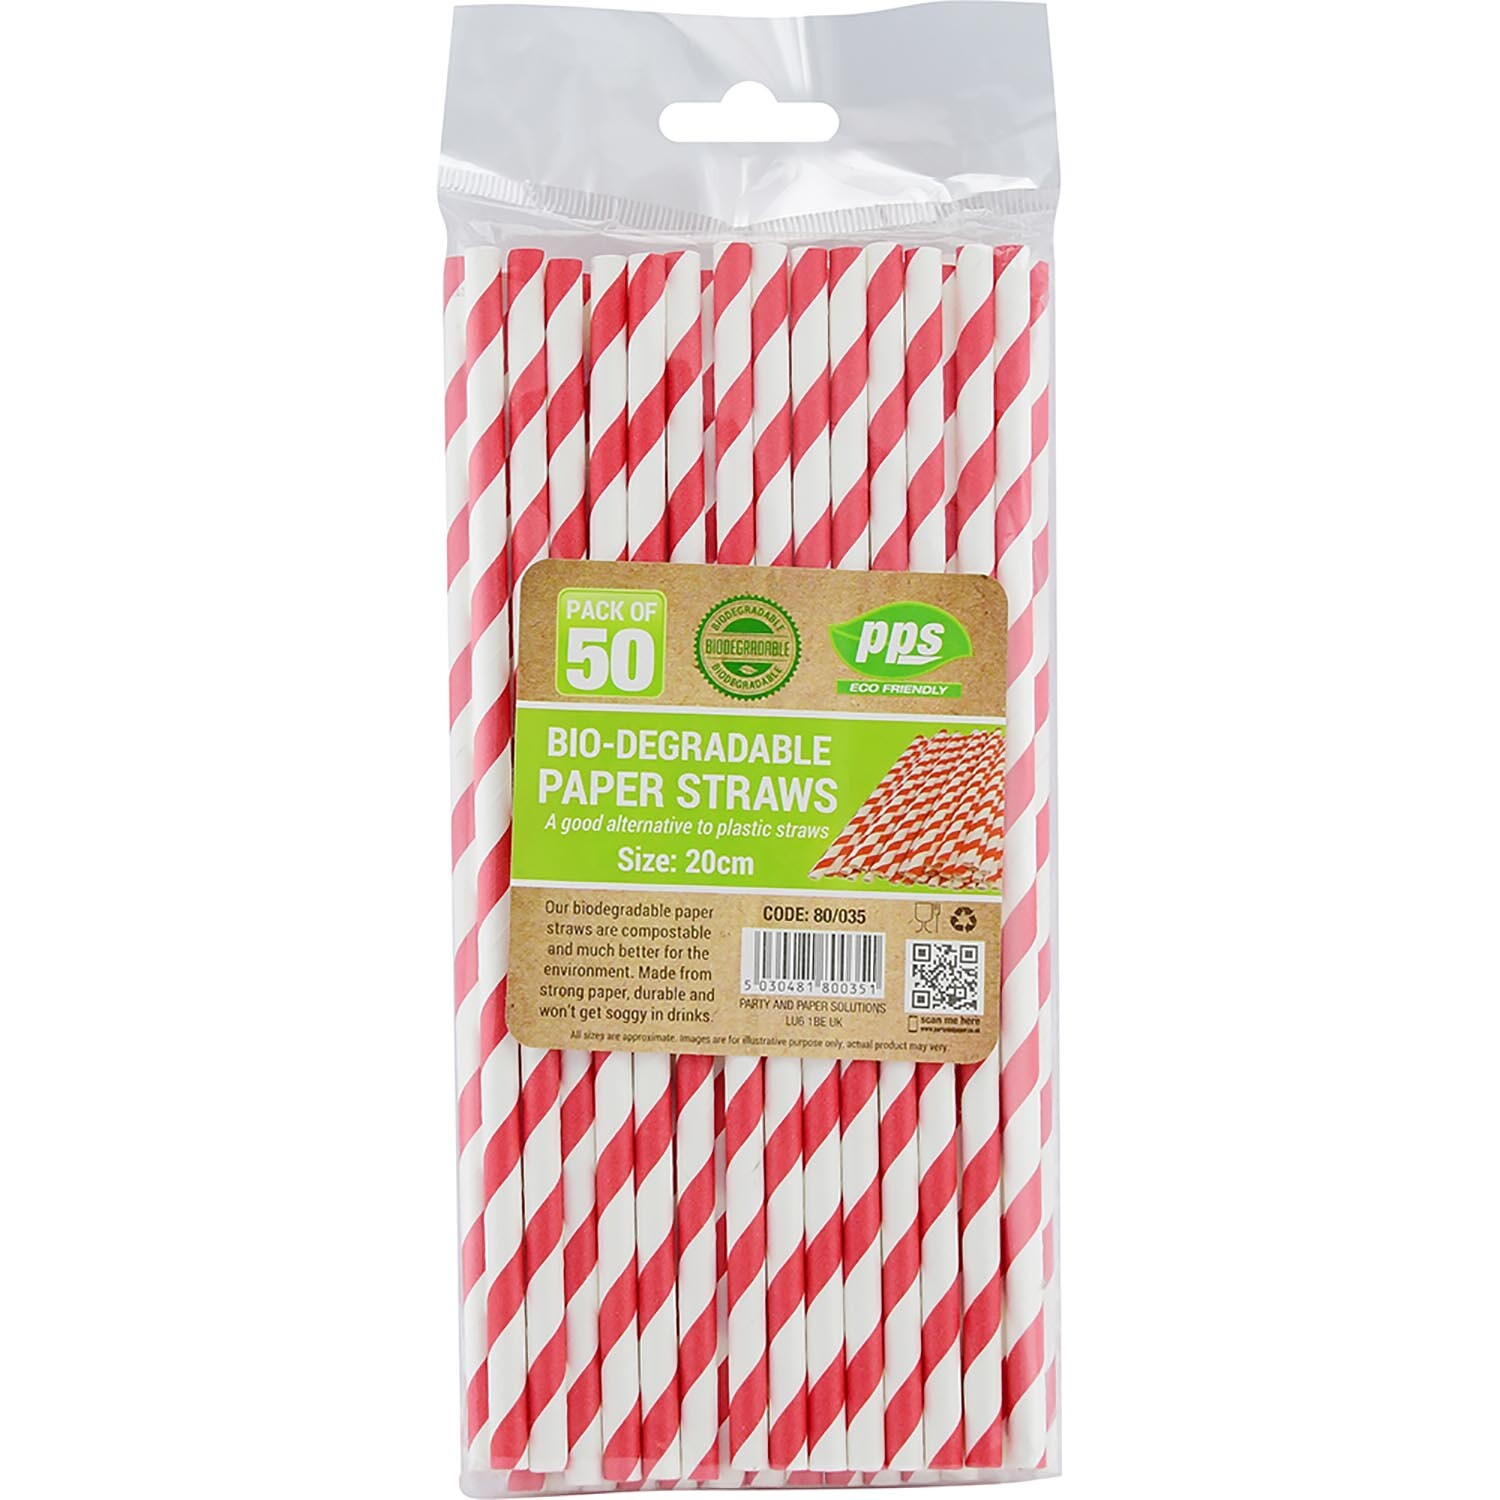 Pack of 50 Bio-Degradable Paper Straws - Red and White Image